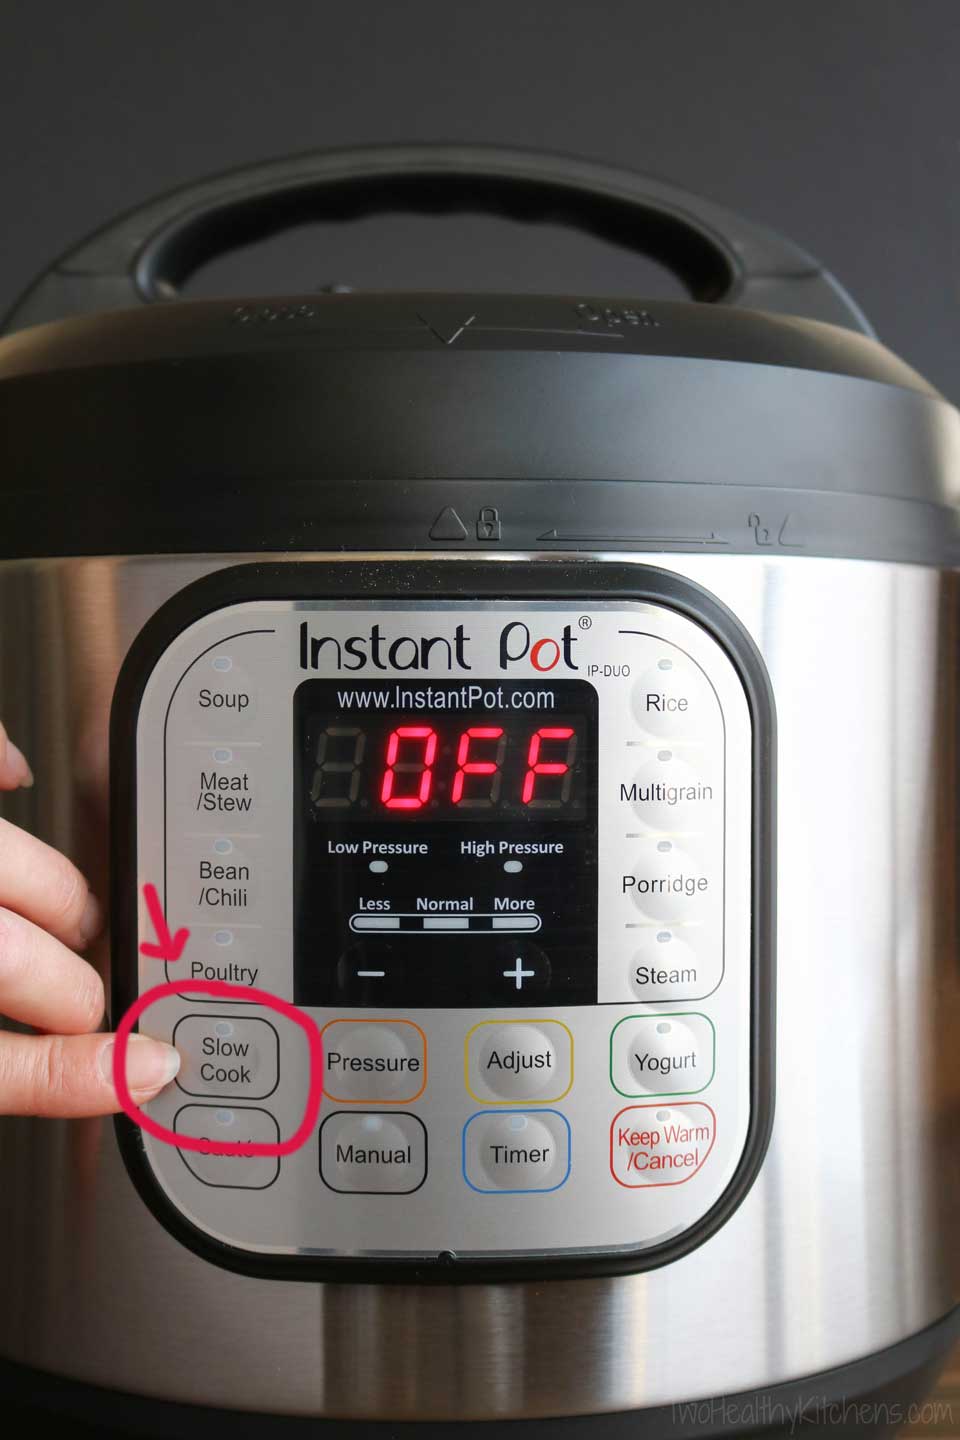 What Is an Instant Pot?